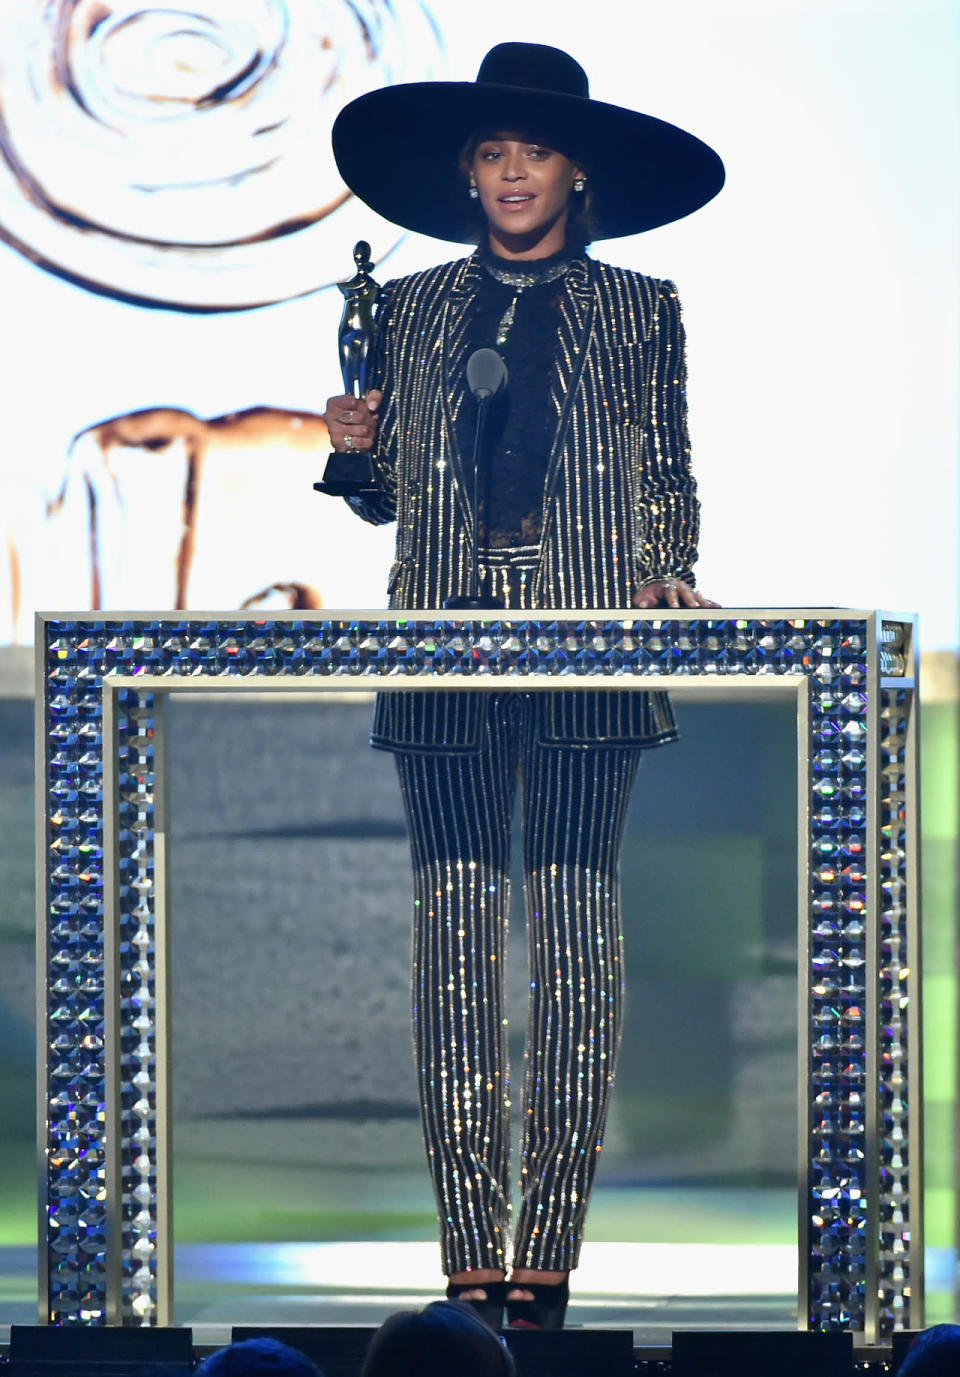 <p>To accept the CFDA’s Fashion Icon Award, Beyoncé, taking a break from Formation World Tour, wore a sequin-striped suit from Givenchy with an oversized wide-brimmed hat. With Jay Z, Blue Ivy, and Tina Knowles in the audience, the <i>Lemonde </i>artist delivered an incredibly powerful speech. “We have an opportunity to contribute to a society where any girl can look at a billboard or magazine cover and see her own reflection. Soul has no color. no shape, no form,” she said. “Just like all your work it goes so far beyond what the eyes can see. You have the power to change perception, to inspire and empower, to show people how to embrace their complications and flaws and see the true beauty that’s inside all of us.” <i>(Photo: Getty Images)</i></p>